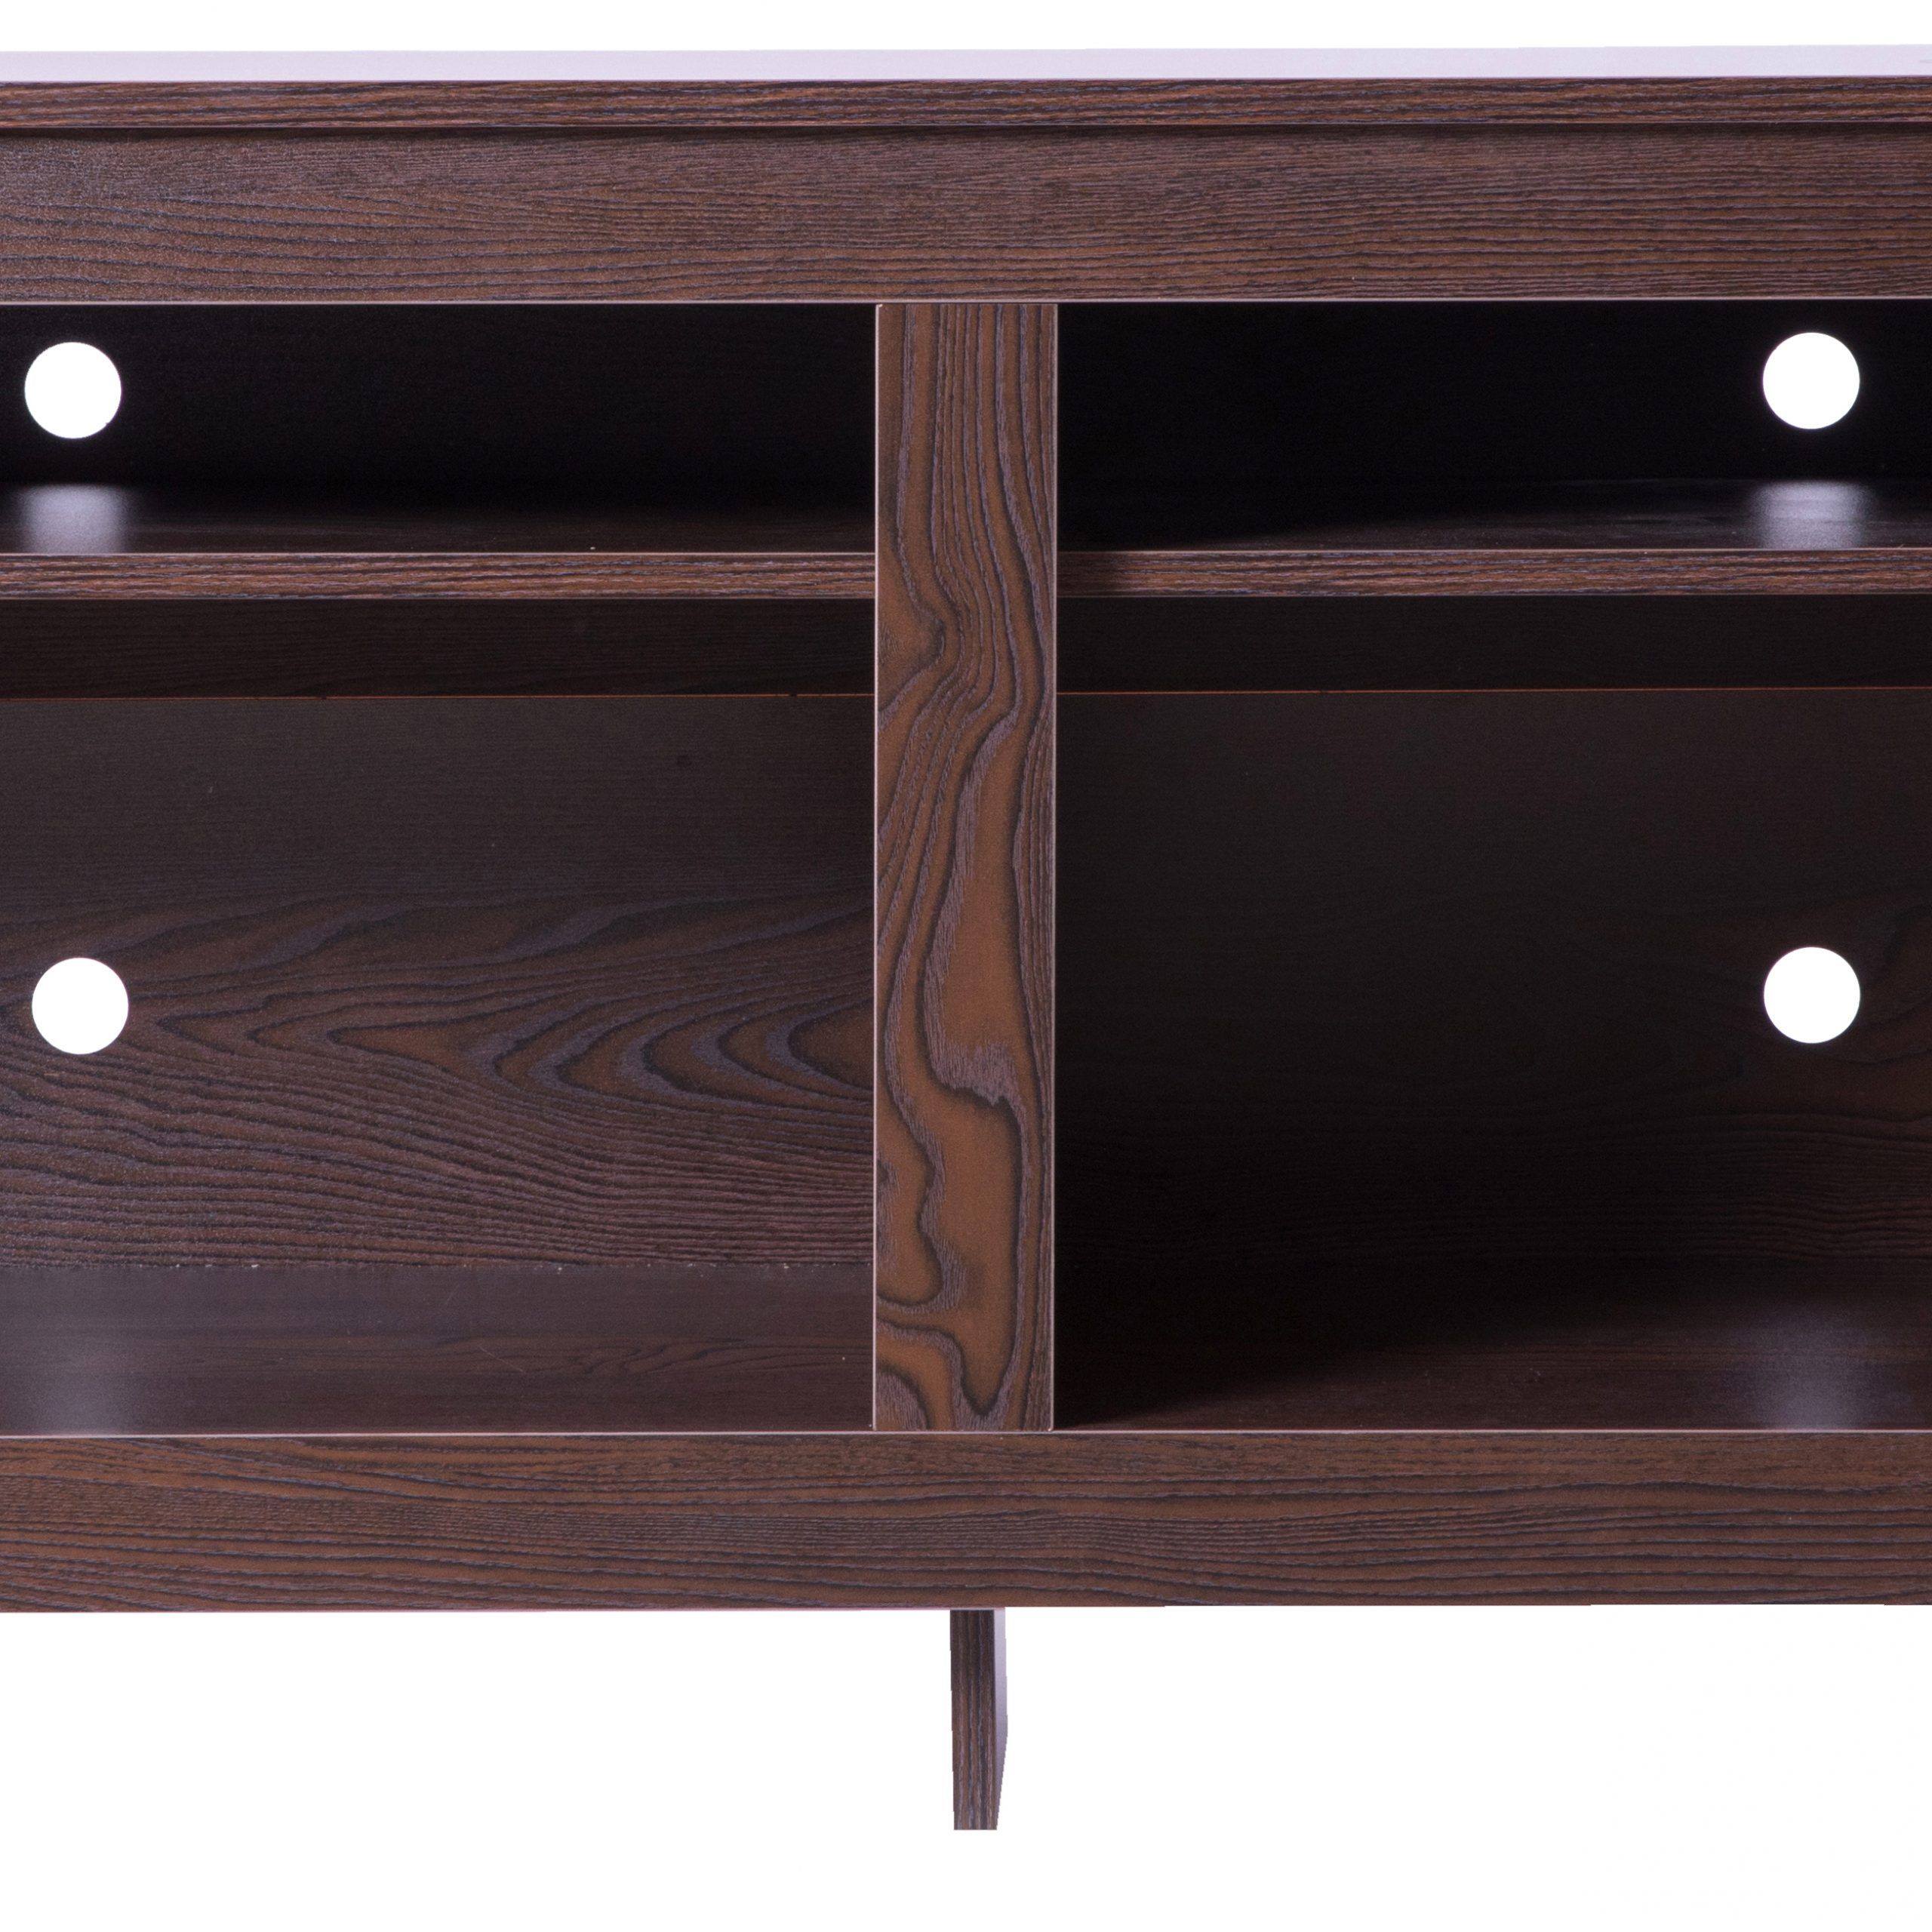 New Basicwise Wooden Tv Stand Console Table With Shelves With Regard To Matte Black Console Tables (View 6 of 20)